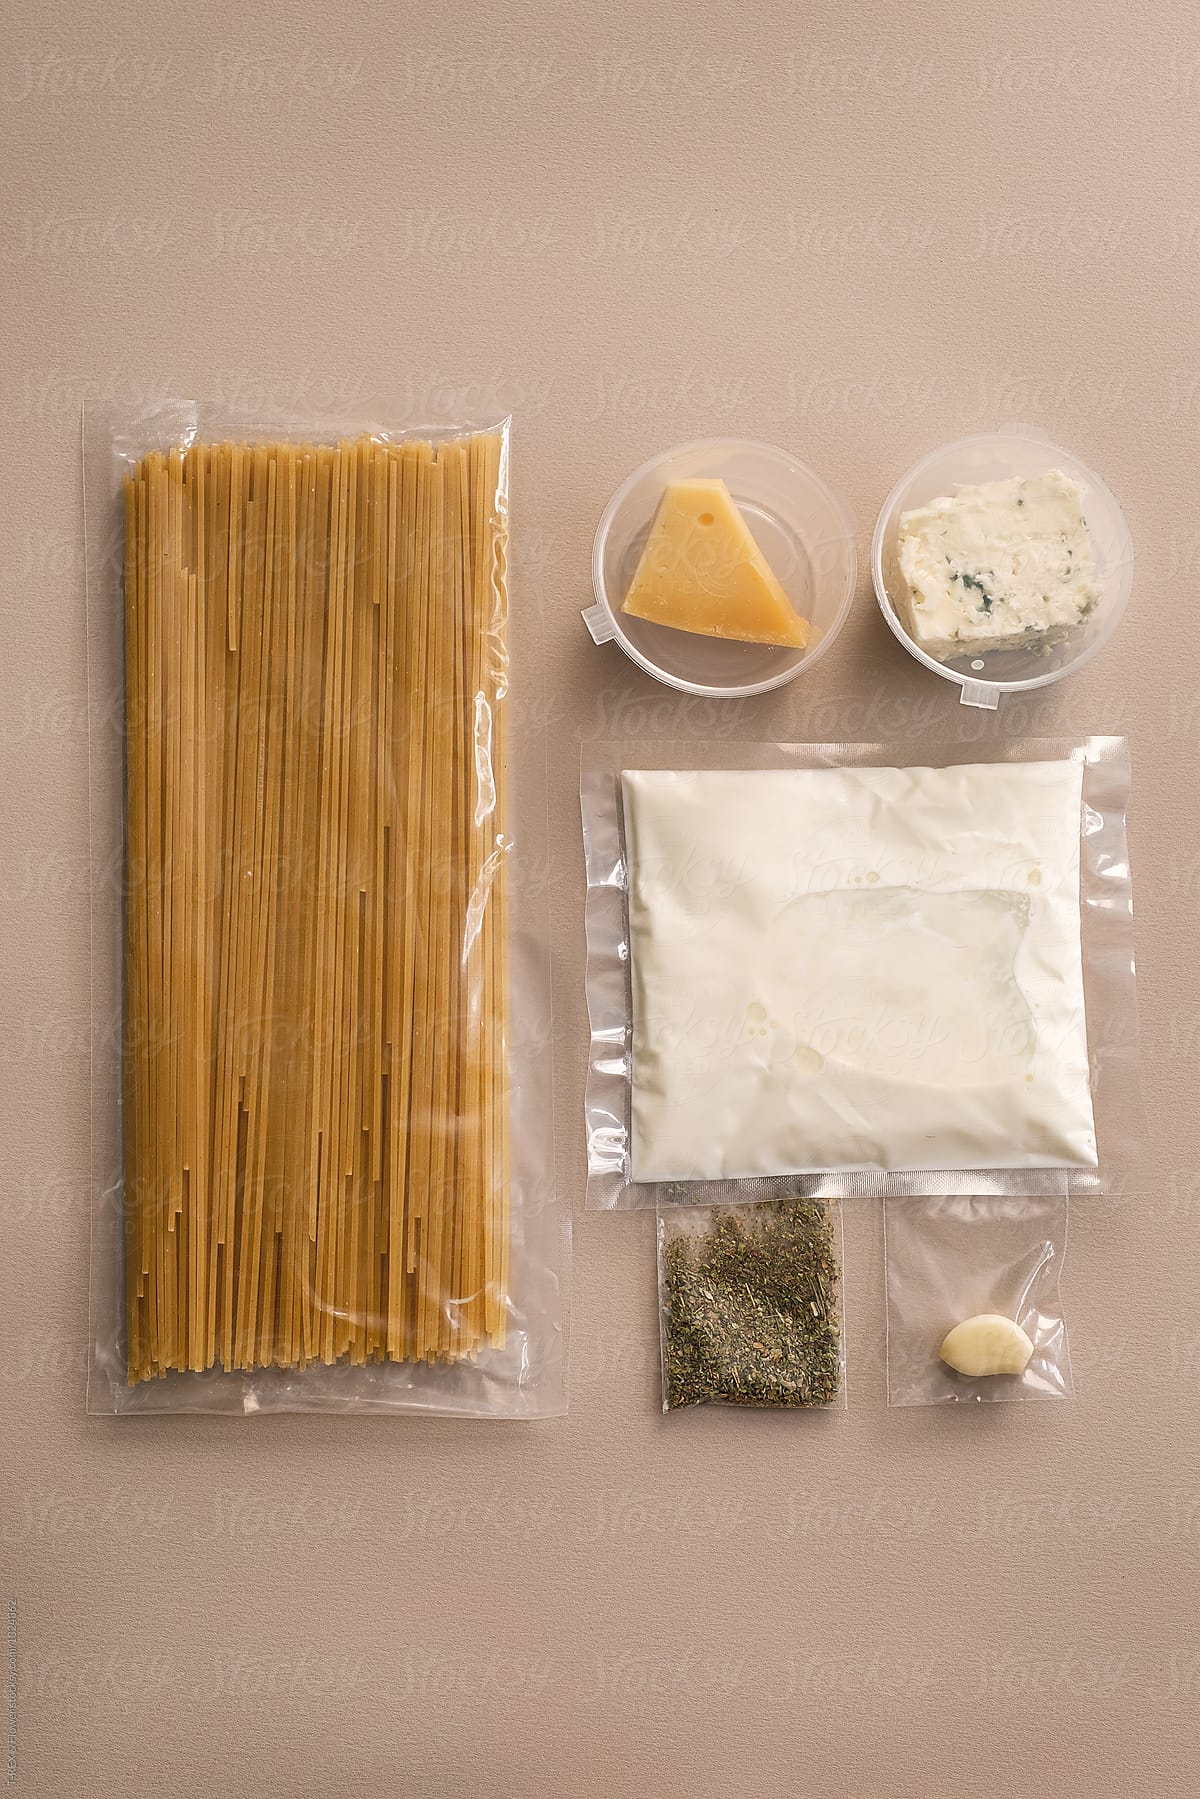 The pasta ingredients in packages